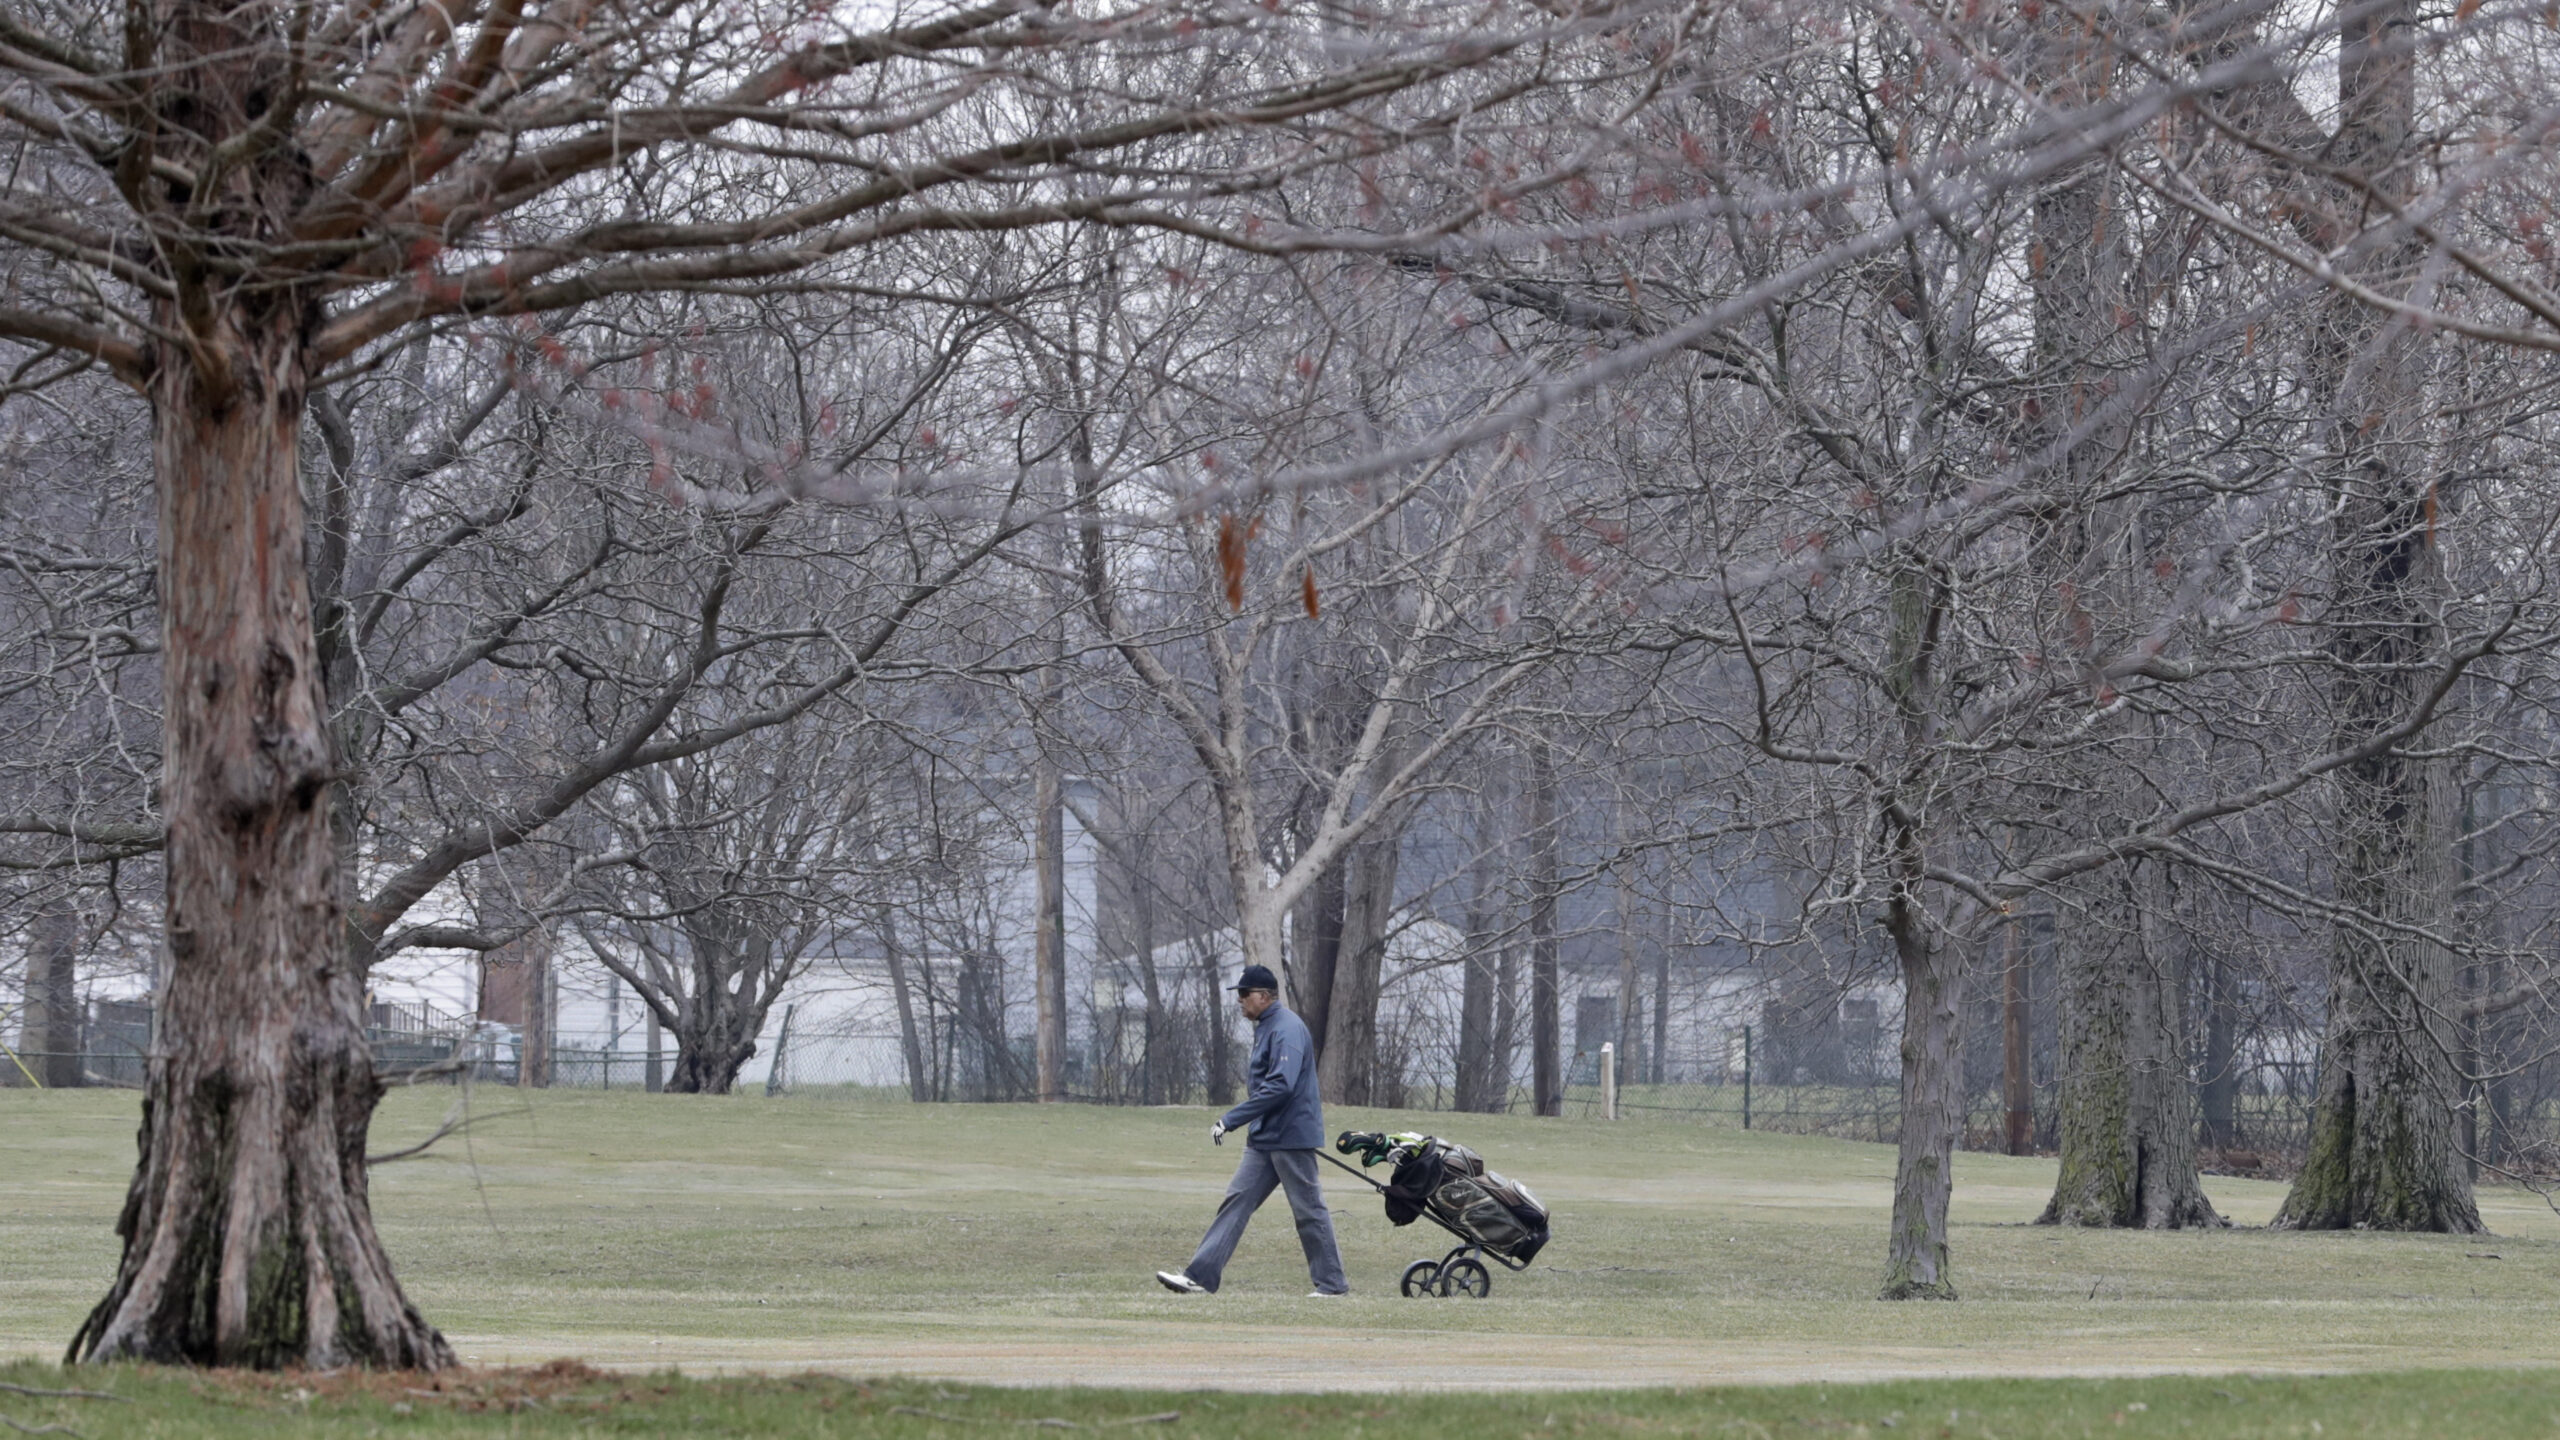 Golf courses extending seasons as warm weather persists